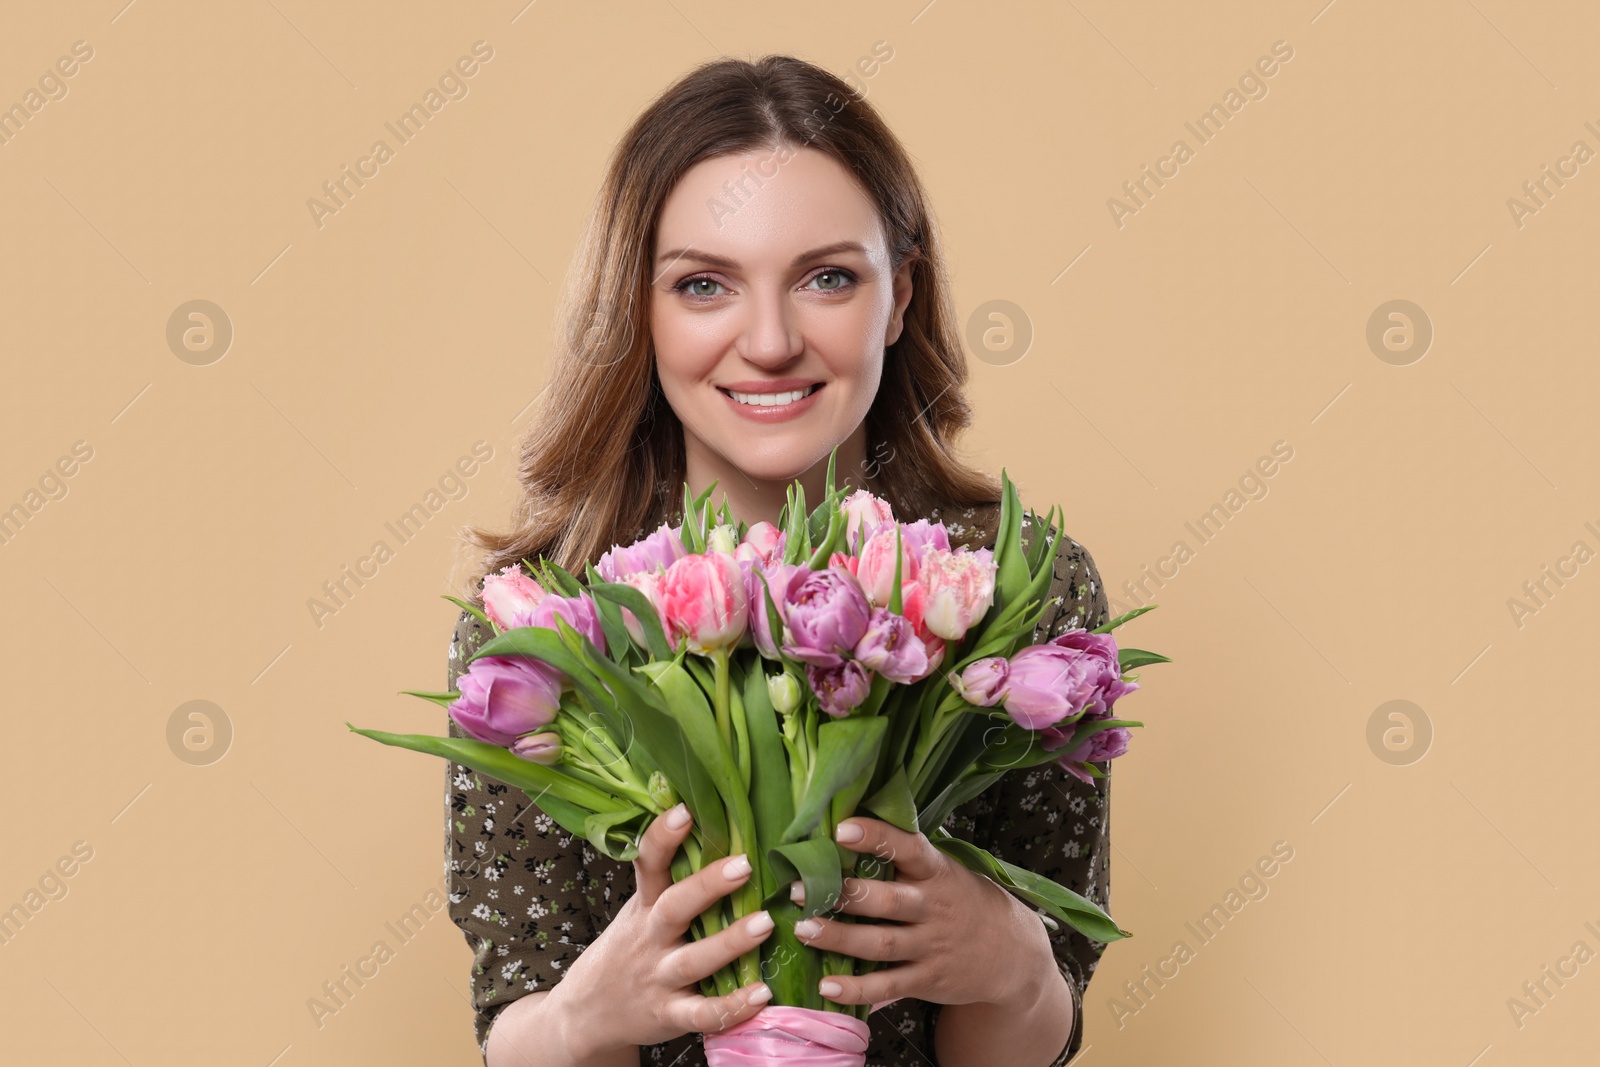 Photo of Happy young woman holding bouquet of beautiful tulips on beige background